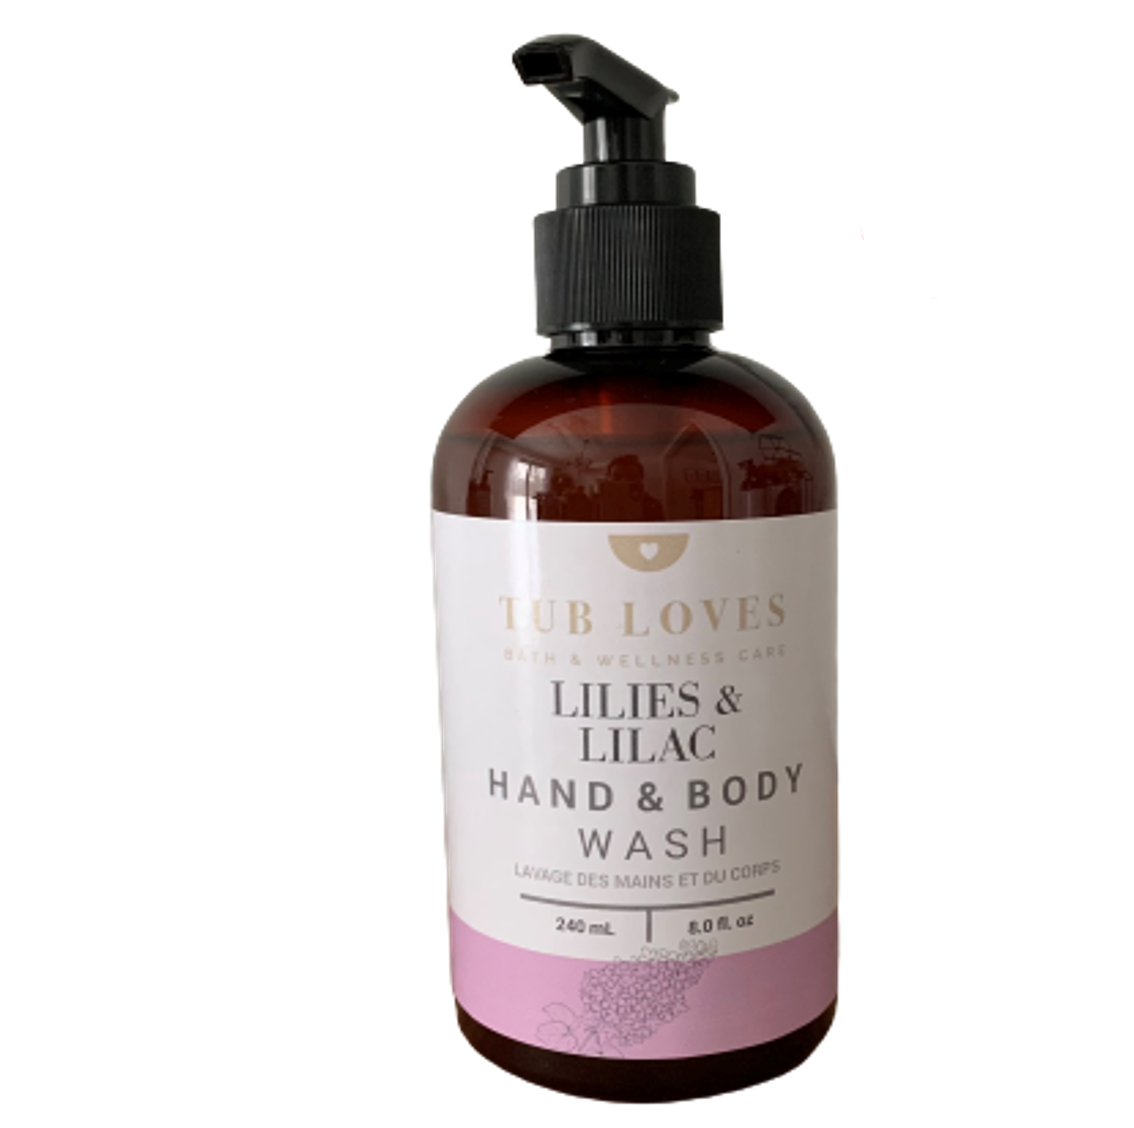 Lilies & Lilac - Hand and Body Wash